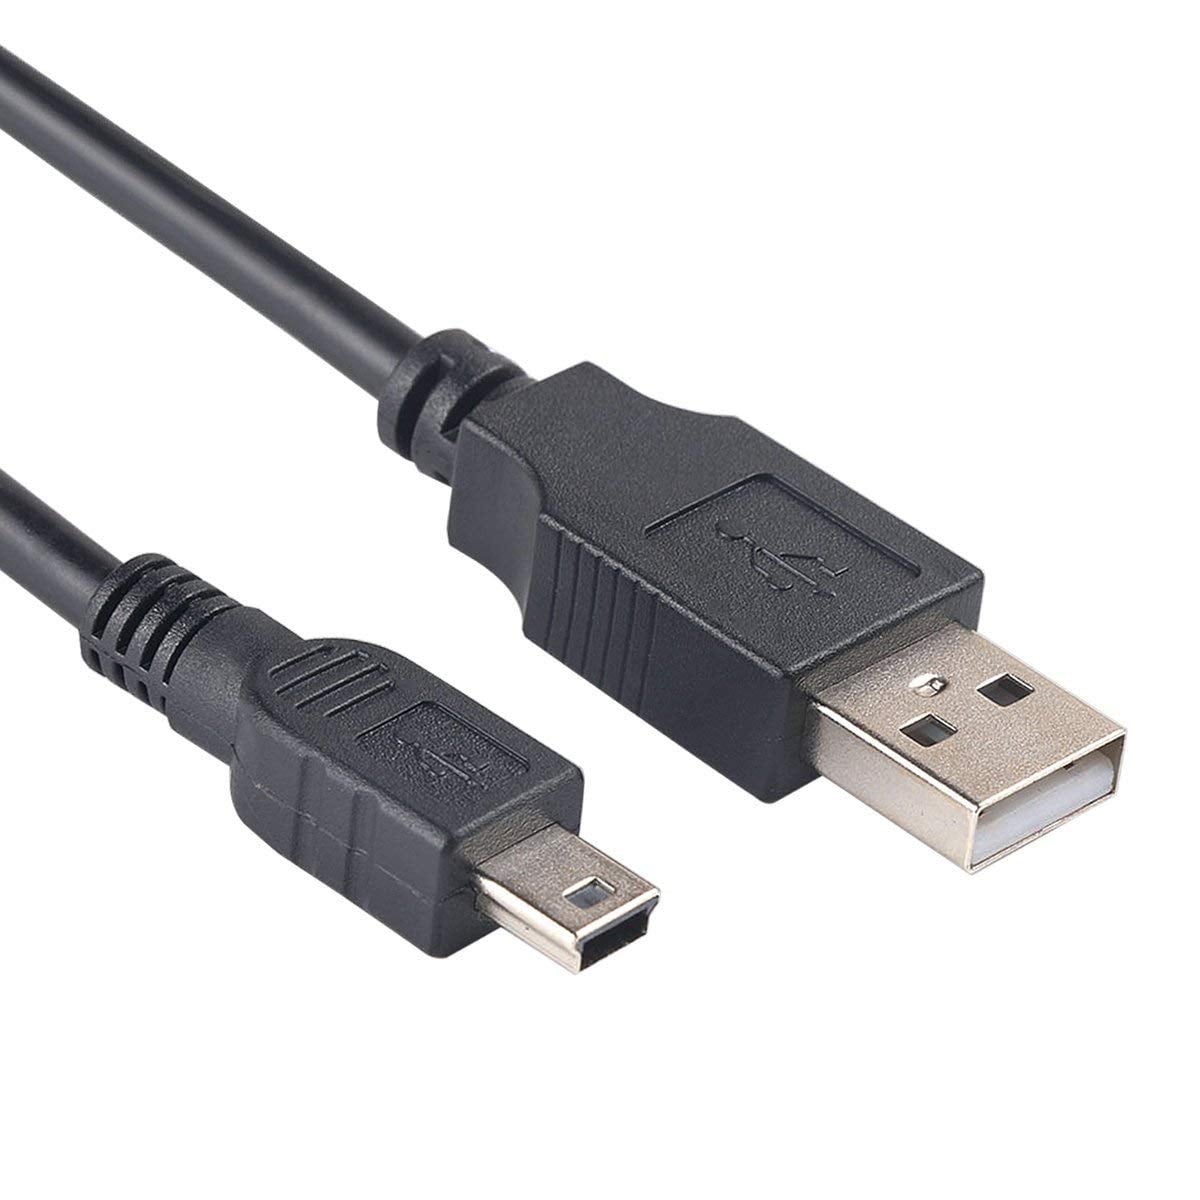 Hold op involveret Undervisning USB PC Charger Charging Cable Cord for TI-84 Plus CE Graphing Calculator -  Walmart.com